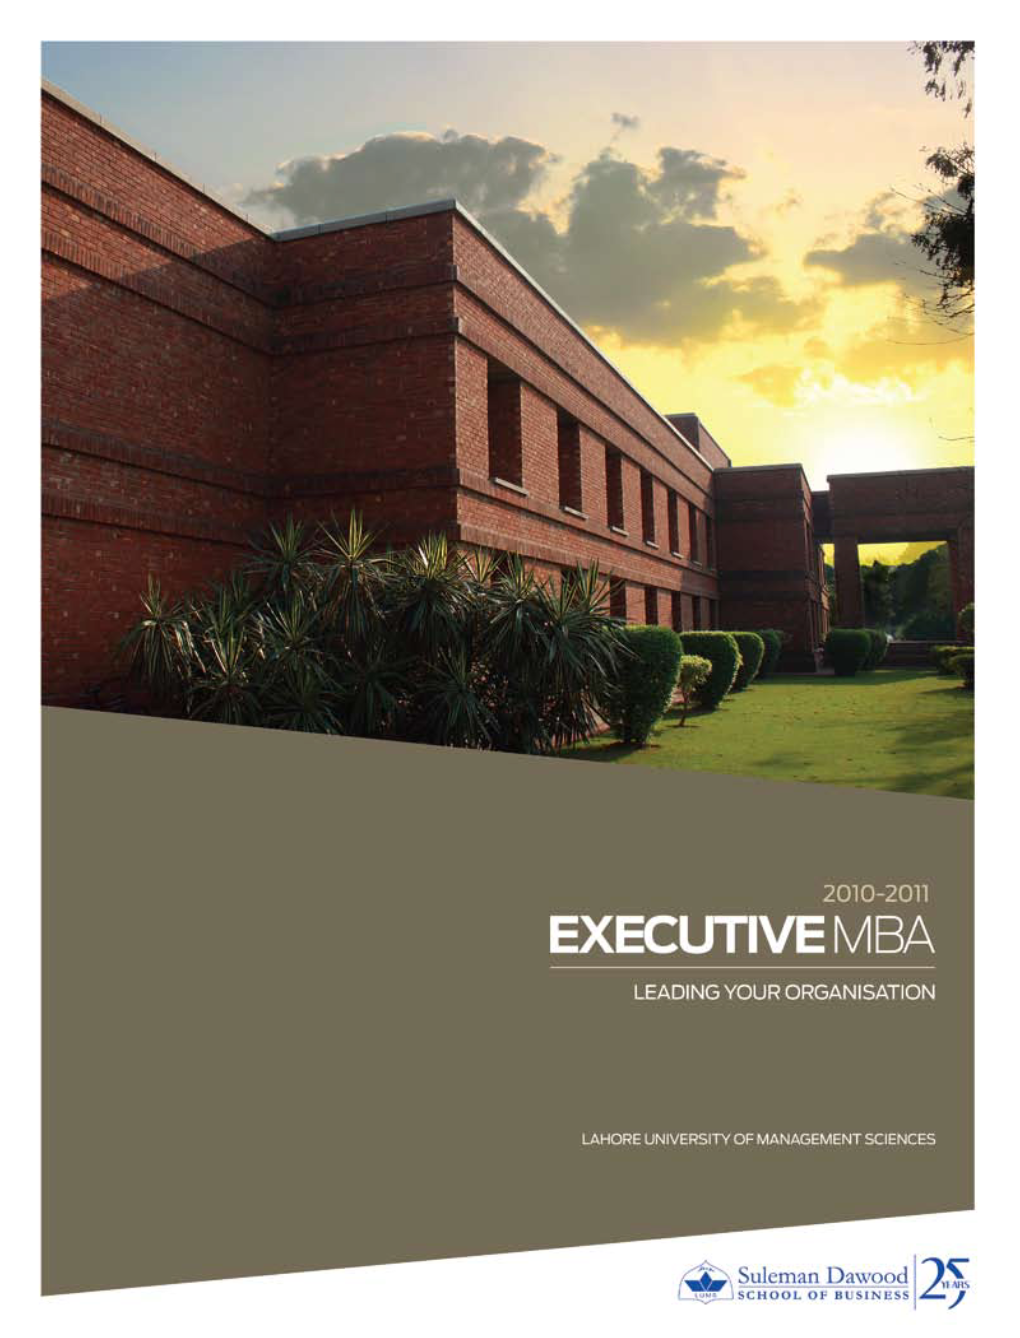 Benefits of the Programme the LUMS Executive MBA Provides a Number of Benefits Both to the Participants and the Sponsoring Organisations